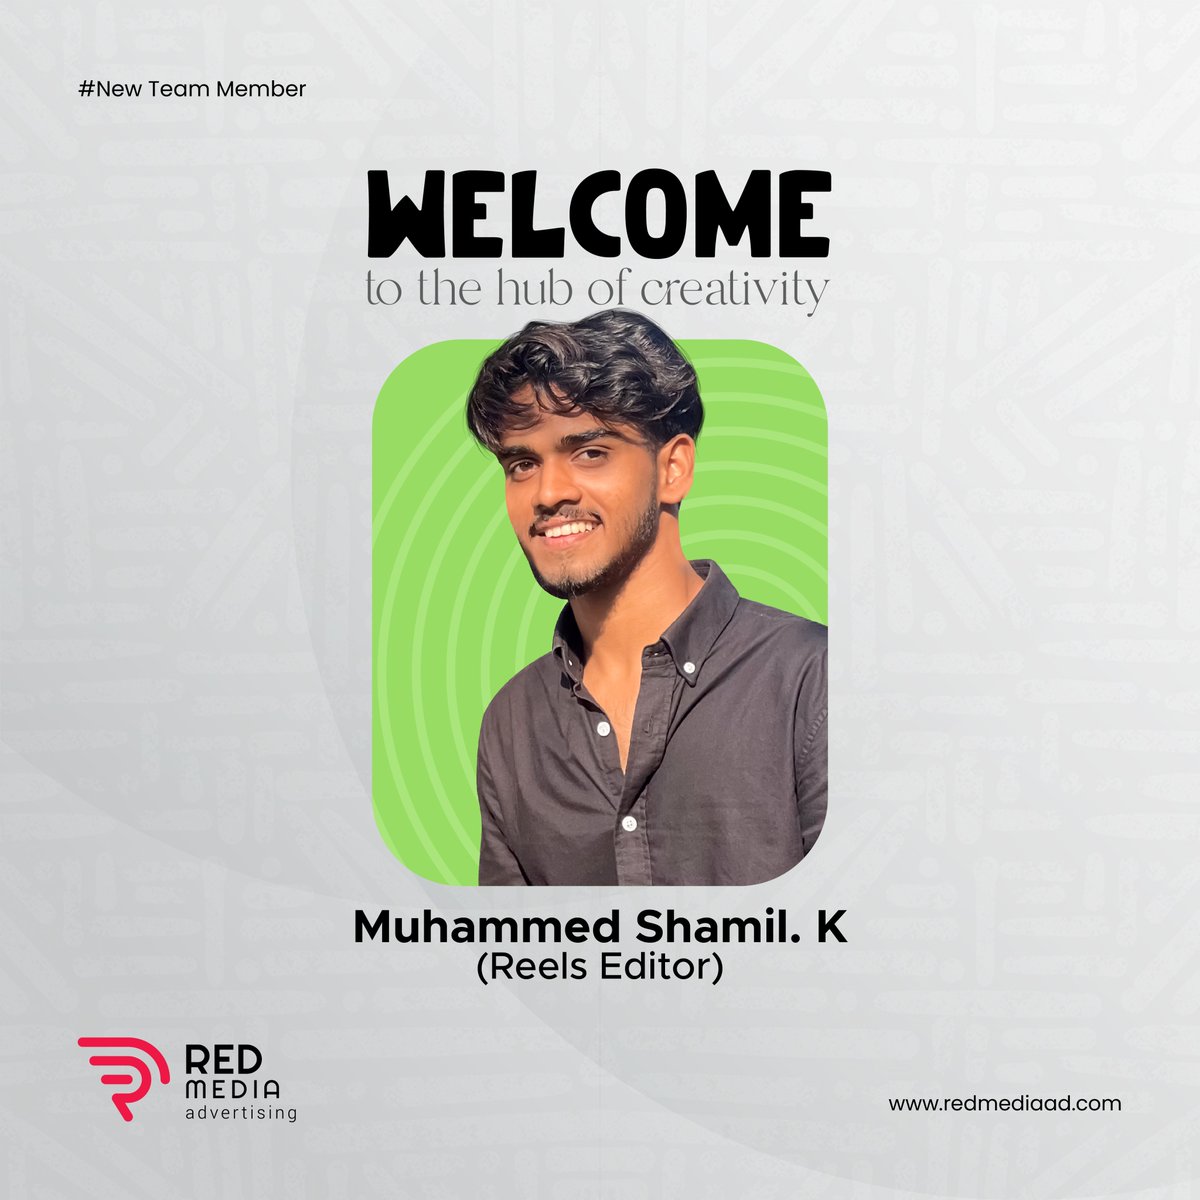 Welcome to our Team Shamil.
Get ready for cinematic excellence as we embark on exciting projects together.

Let's create magic on screen!

.

.

#newmember #videocreator
#reeleditor
#redmediaadvertising #advertisingagency #kottakkal #malappuram